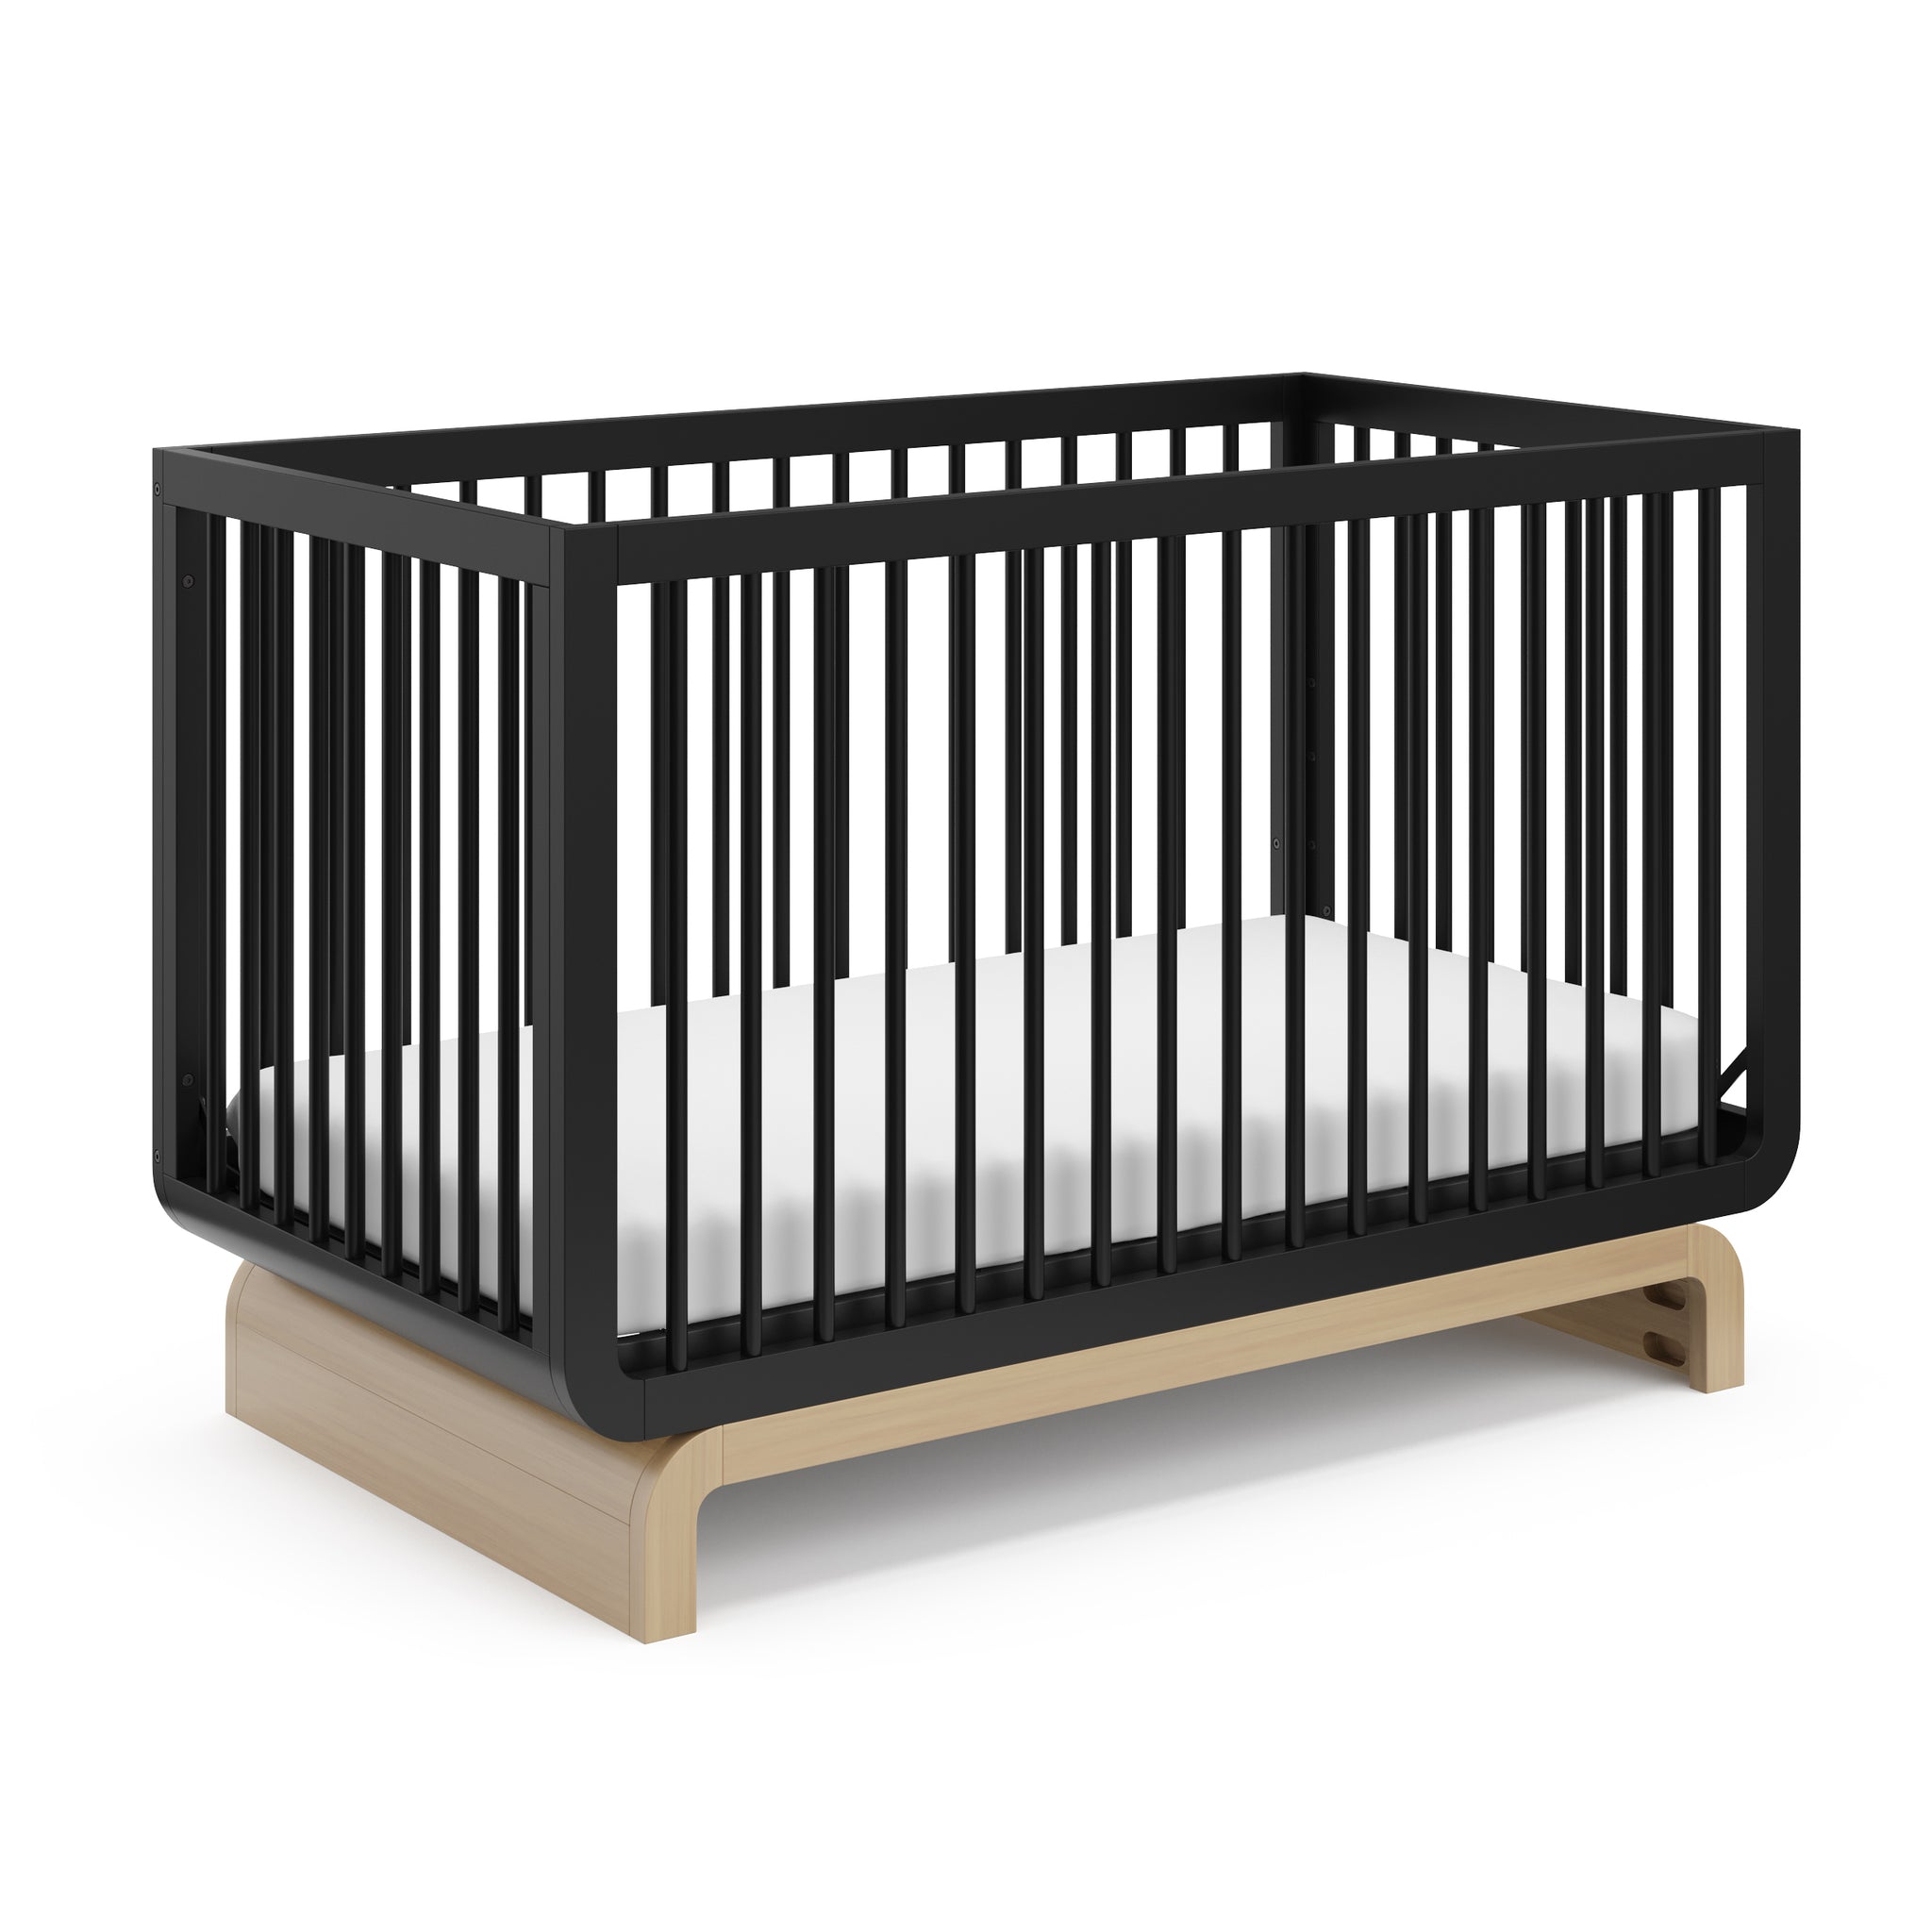 Baby crib in two-tone black and natural wood colorway, at an angle